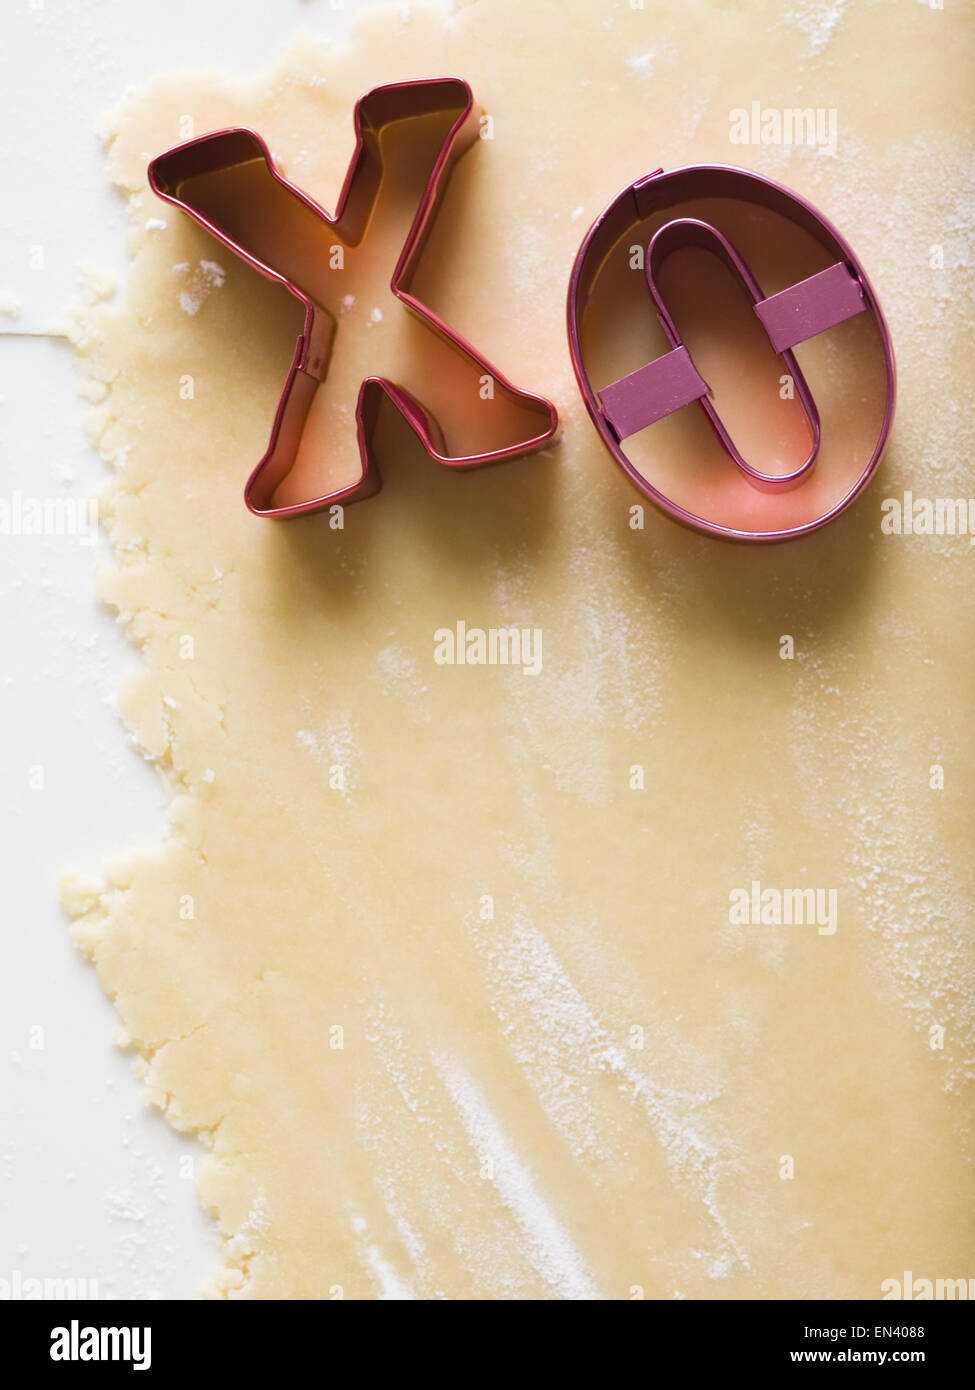 Detailed view of dough with X and O Stock Photo